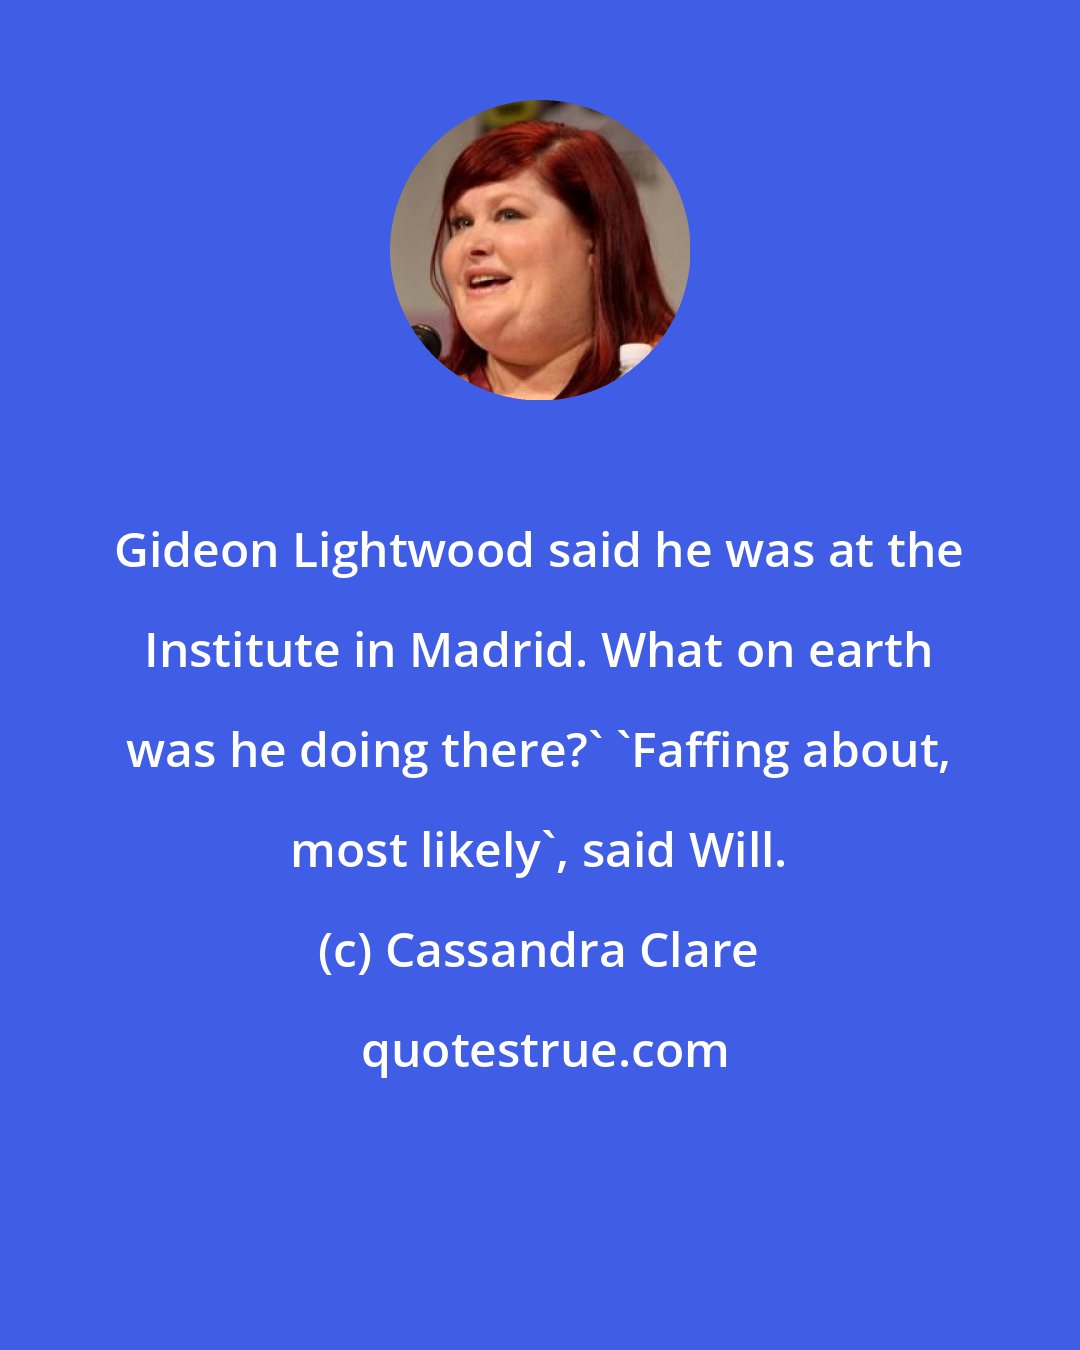 Cassandra Clare: Gideon Lightwood said he was at the Institute in Madrid. What on earth was he doing there?' 'Faffing about, most likely', said Will.